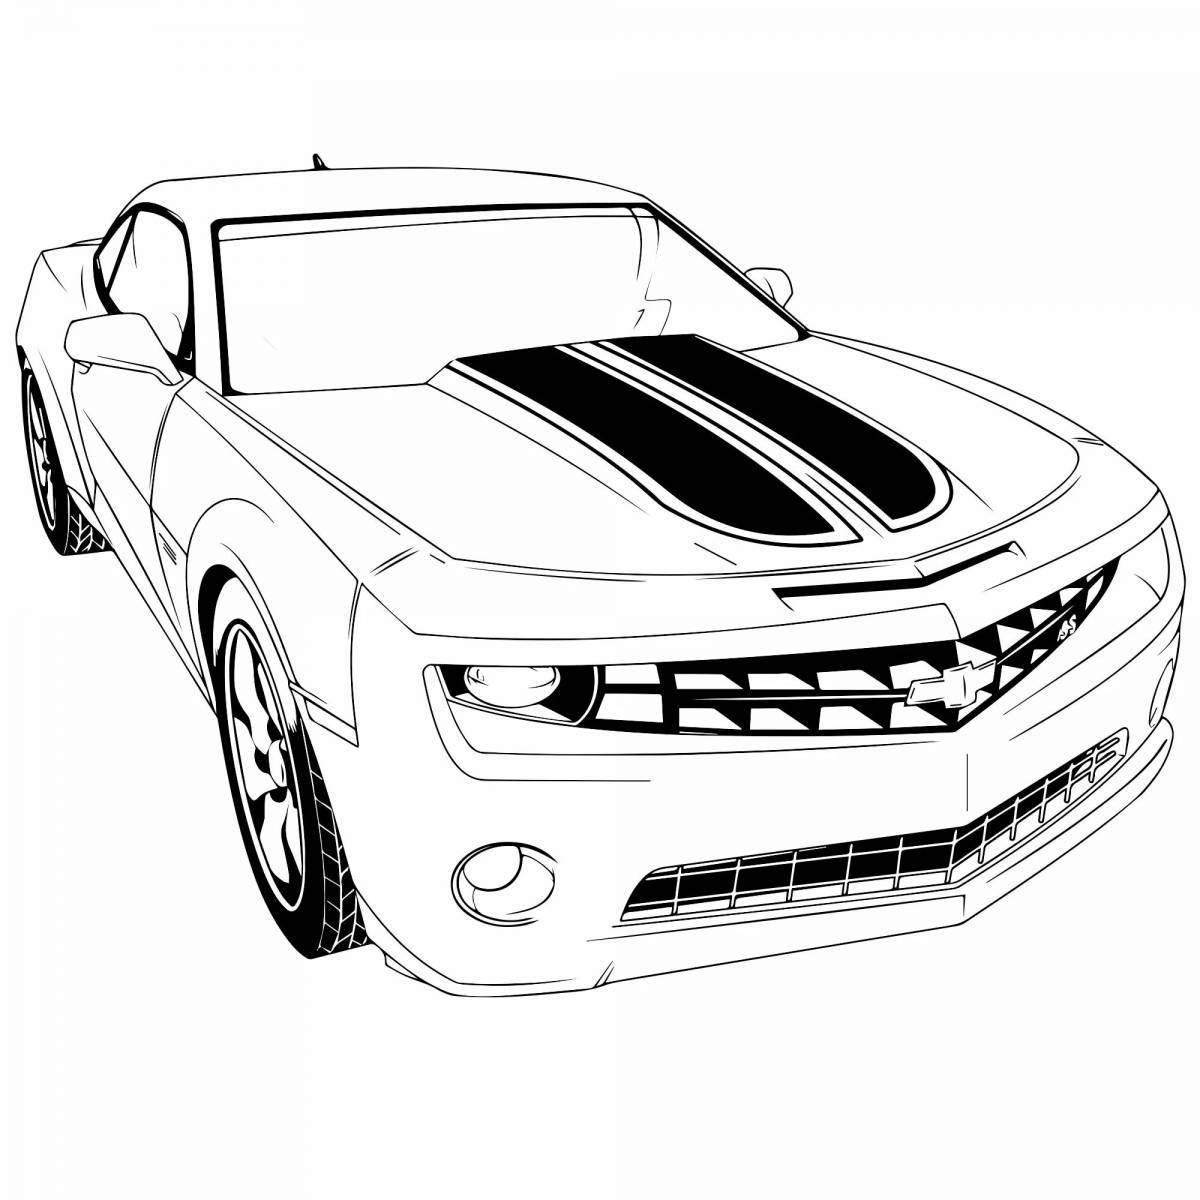 Great black and white coloring book for boys